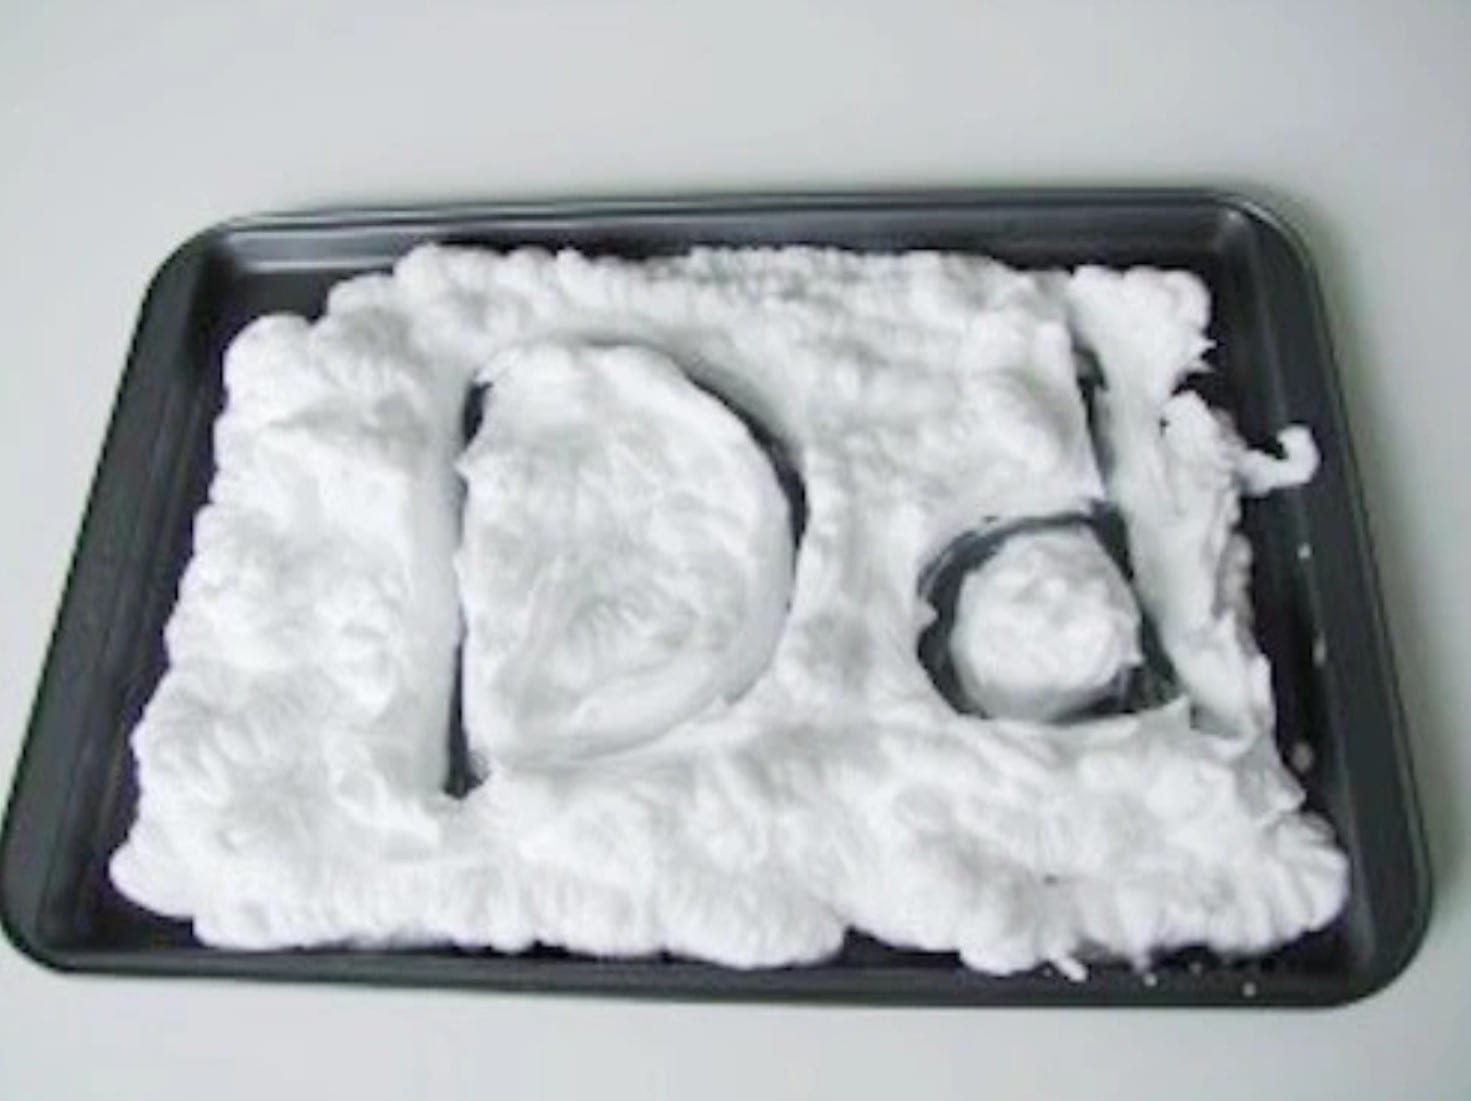 Upper case and lower case letter D written on a cookie sheet covered with shaving cream 